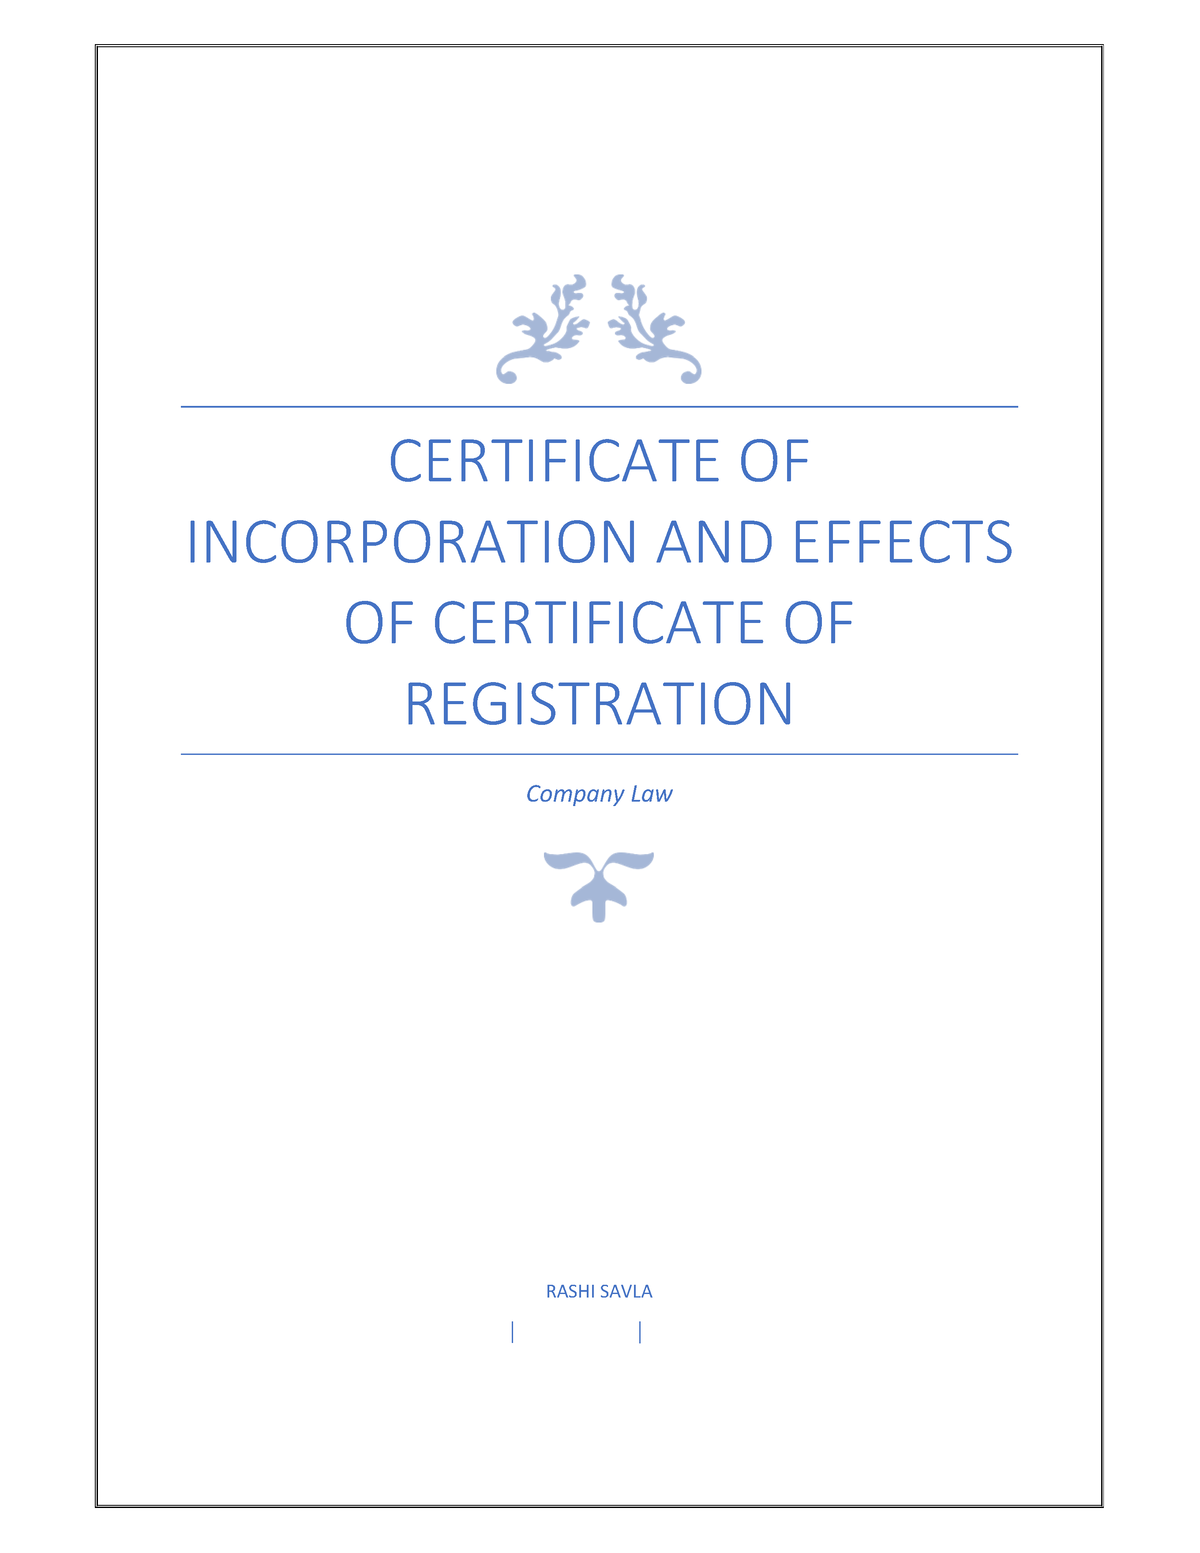 Company Law Certificate of Incorporation Brief Overview CERTIFICATE